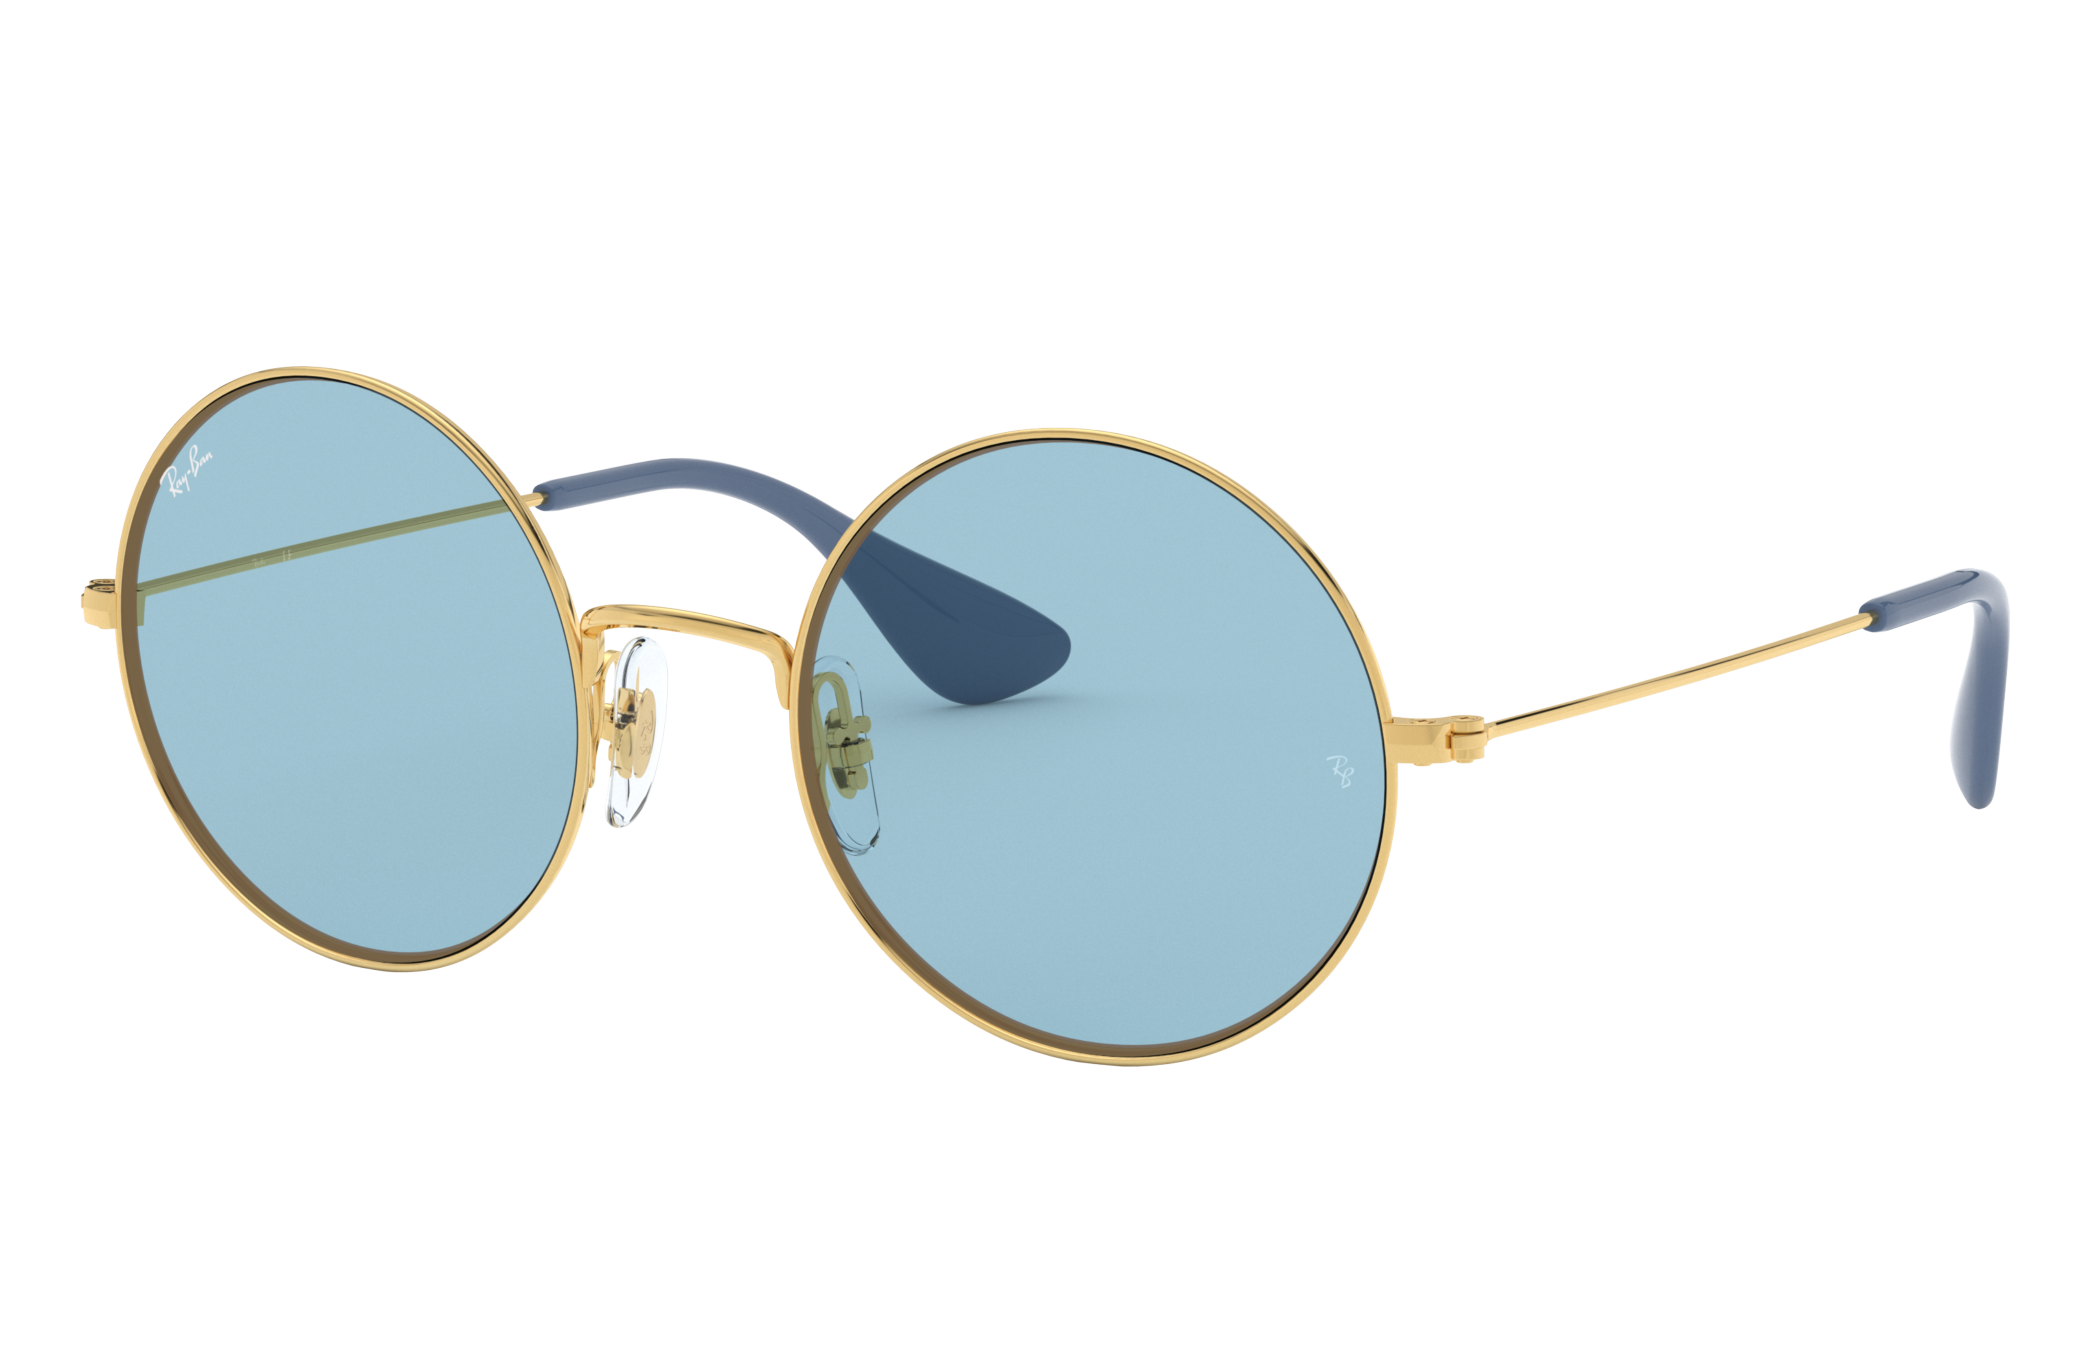 Ray-Ban RB3592 Ja-Jo Sunglasses in Light Blue Classic.png